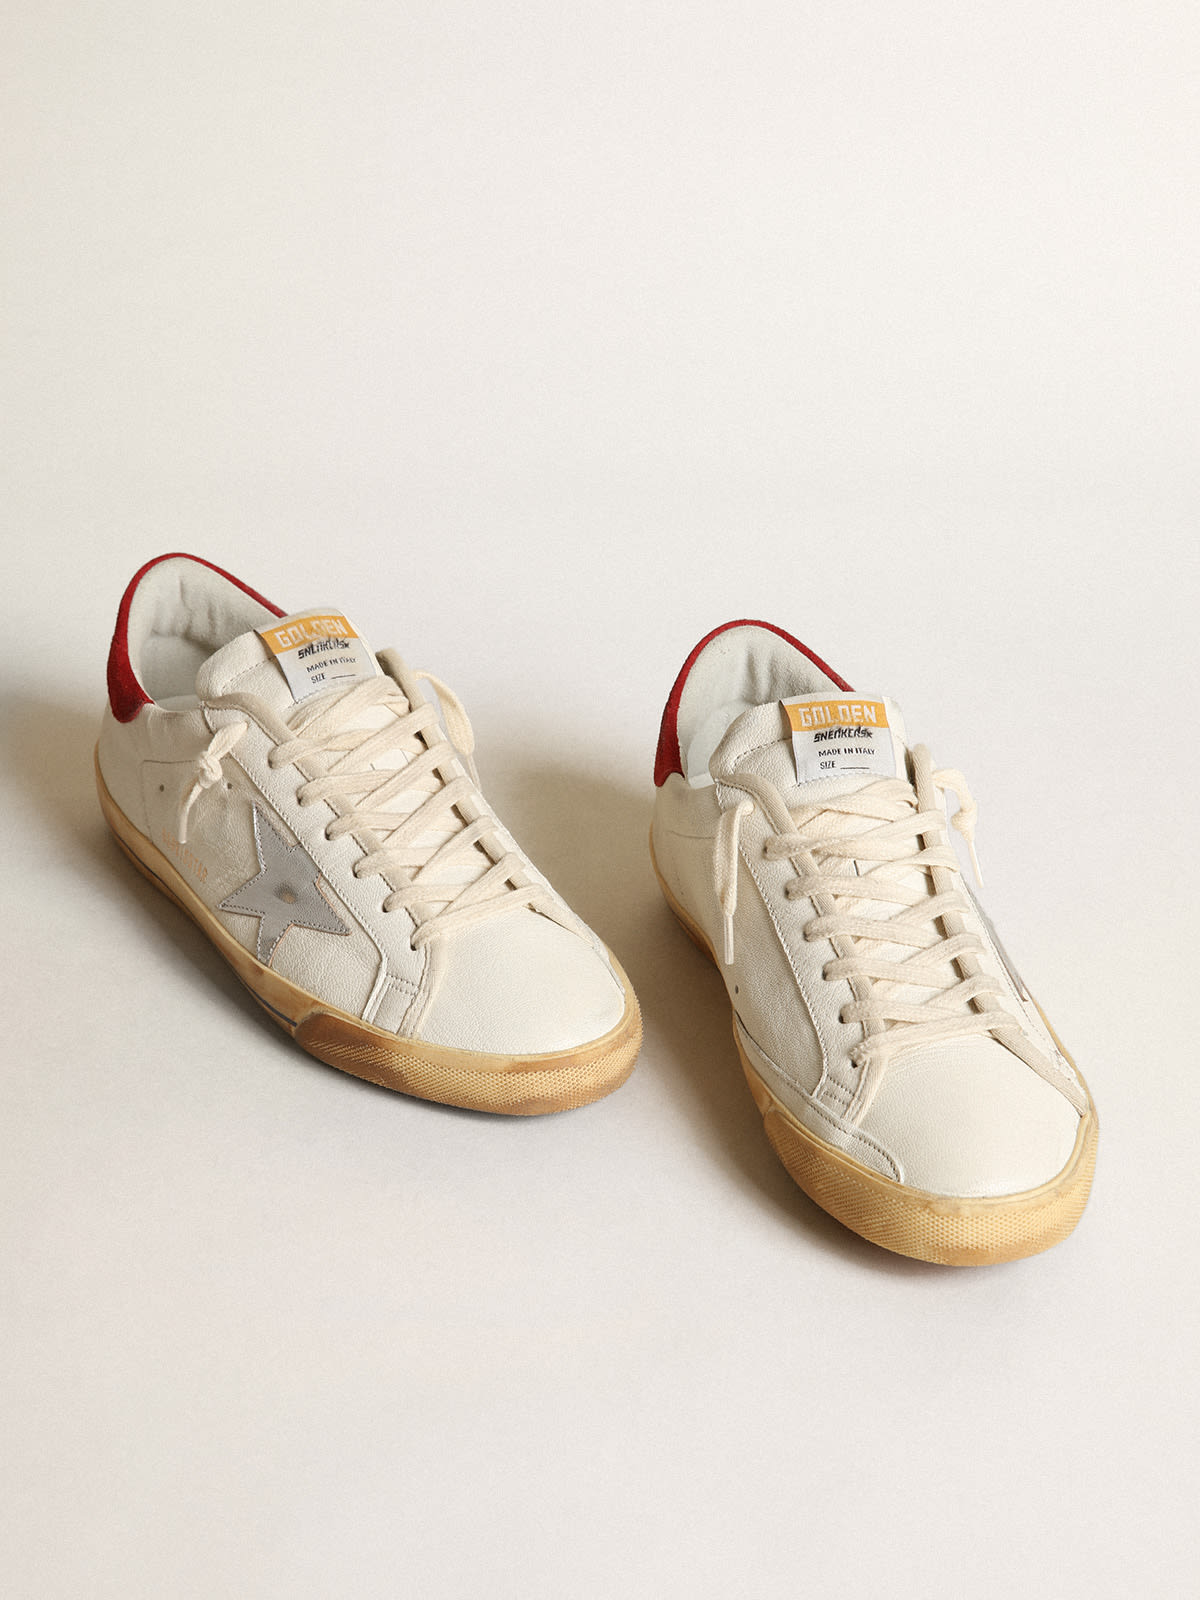 Golden Goose - Super-Star sneakers with silver metallic leather star and red suede heel tab in 